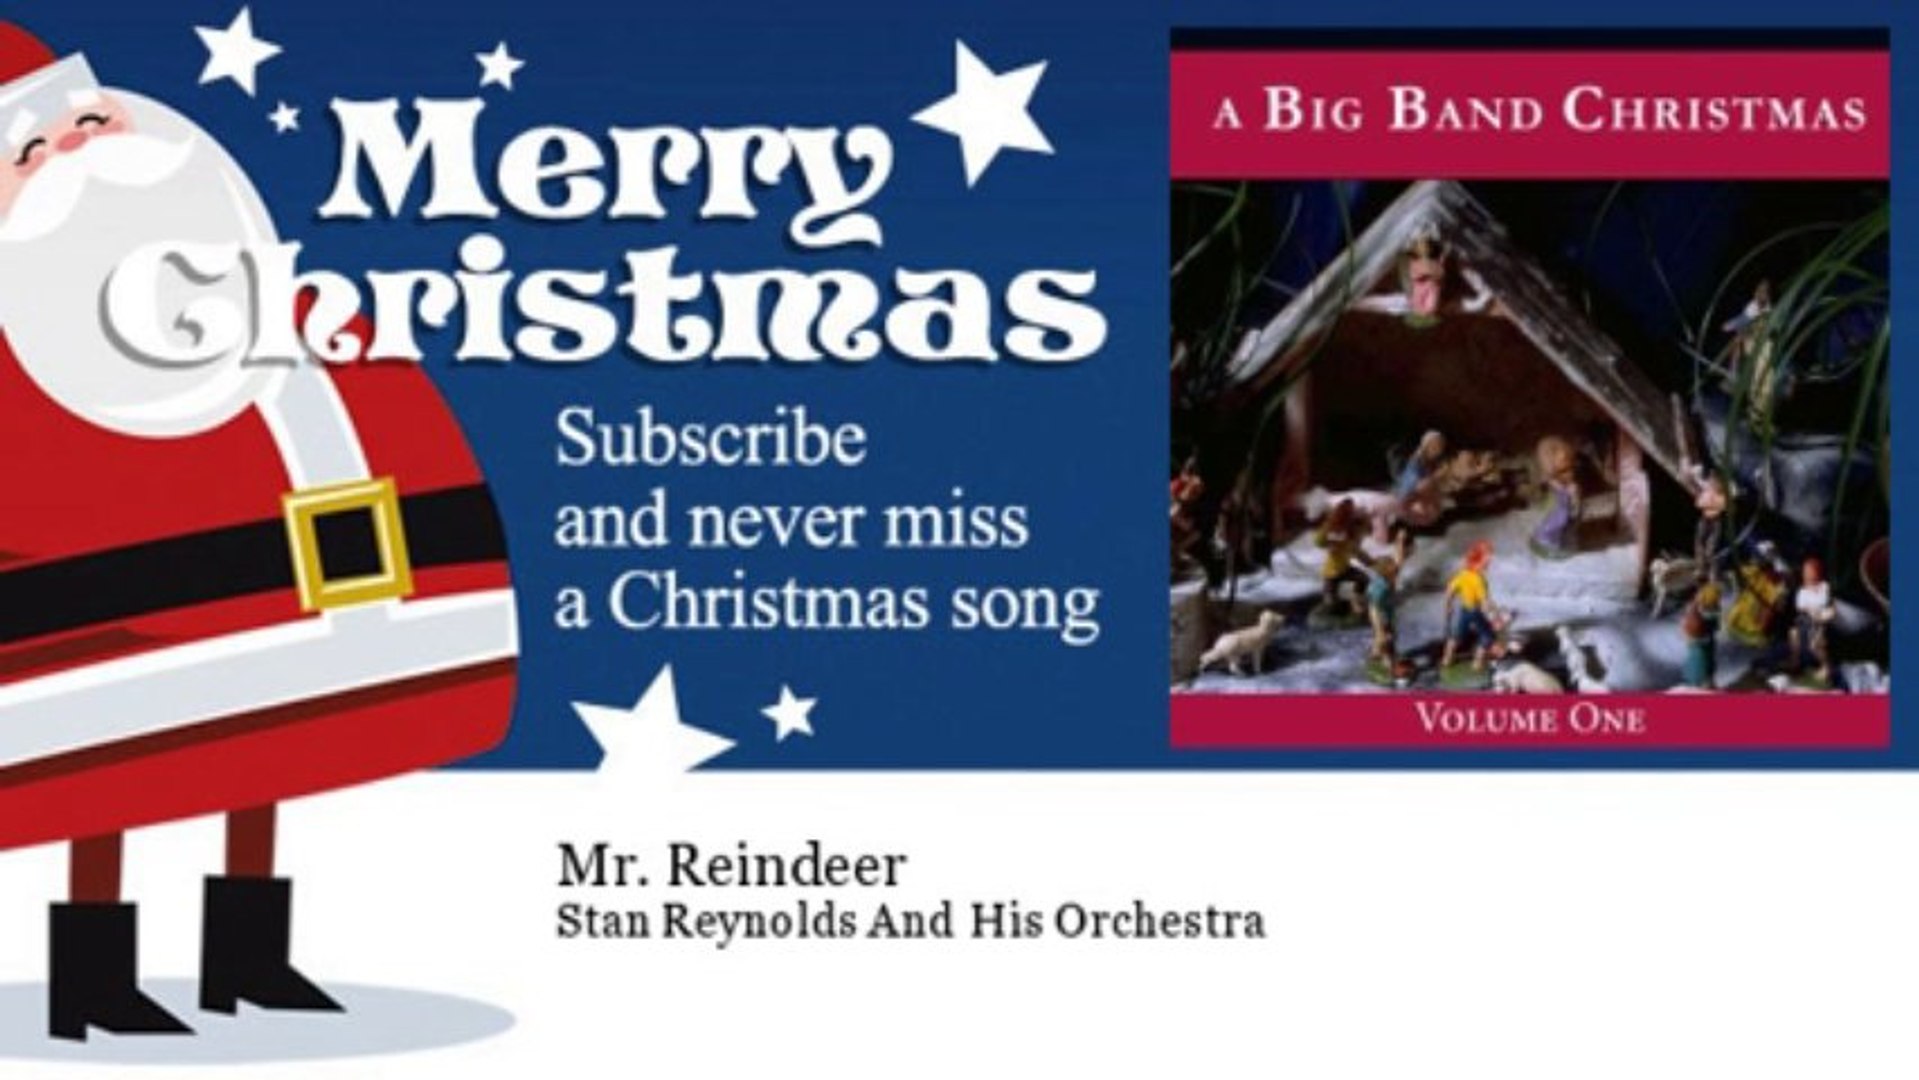 Stan Reynolds And His Orchestra - Mr. Reindeer